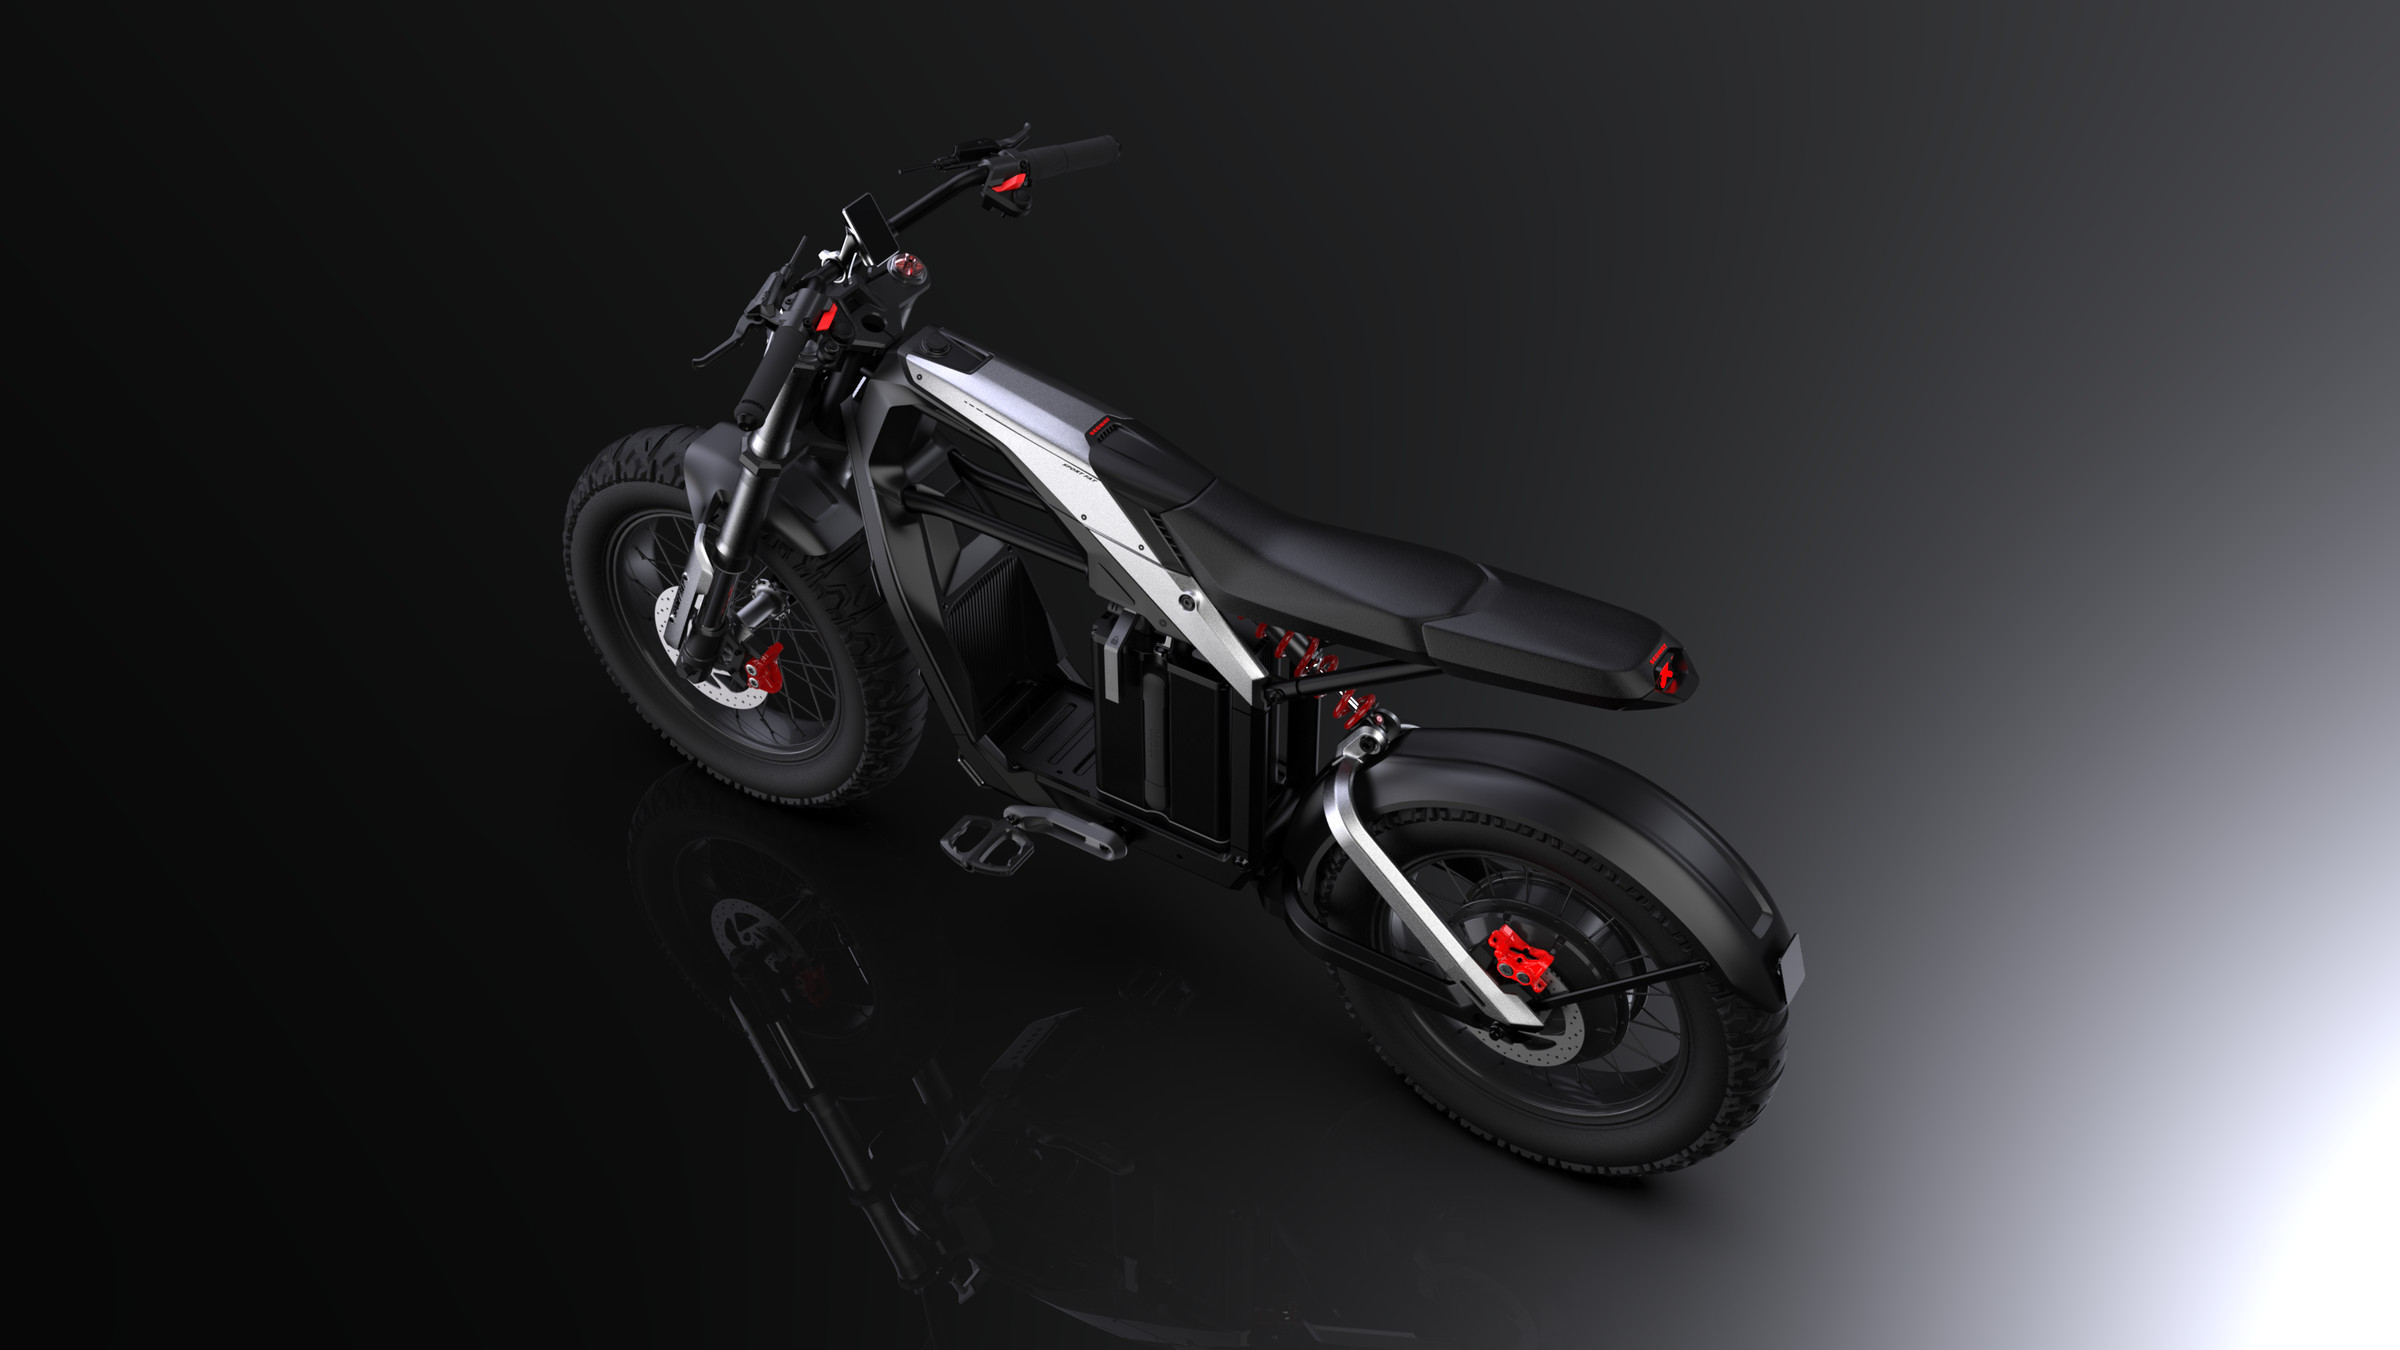 <em>The Xyber has an elongated seat designed for two riders.</em>